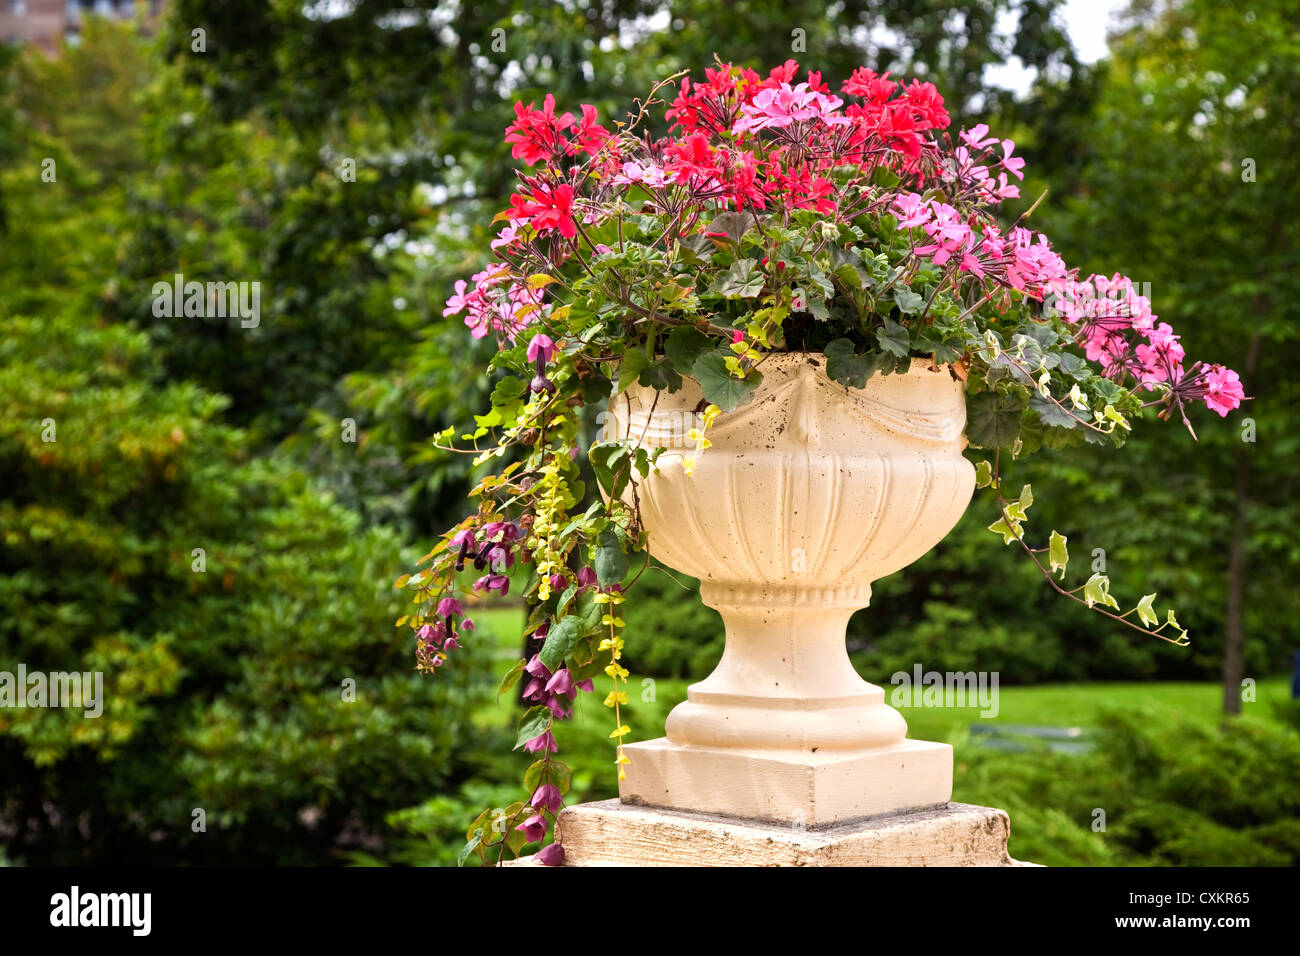 Ornate large cement planters filled with annual flowers in the summer garden. Stock Photo